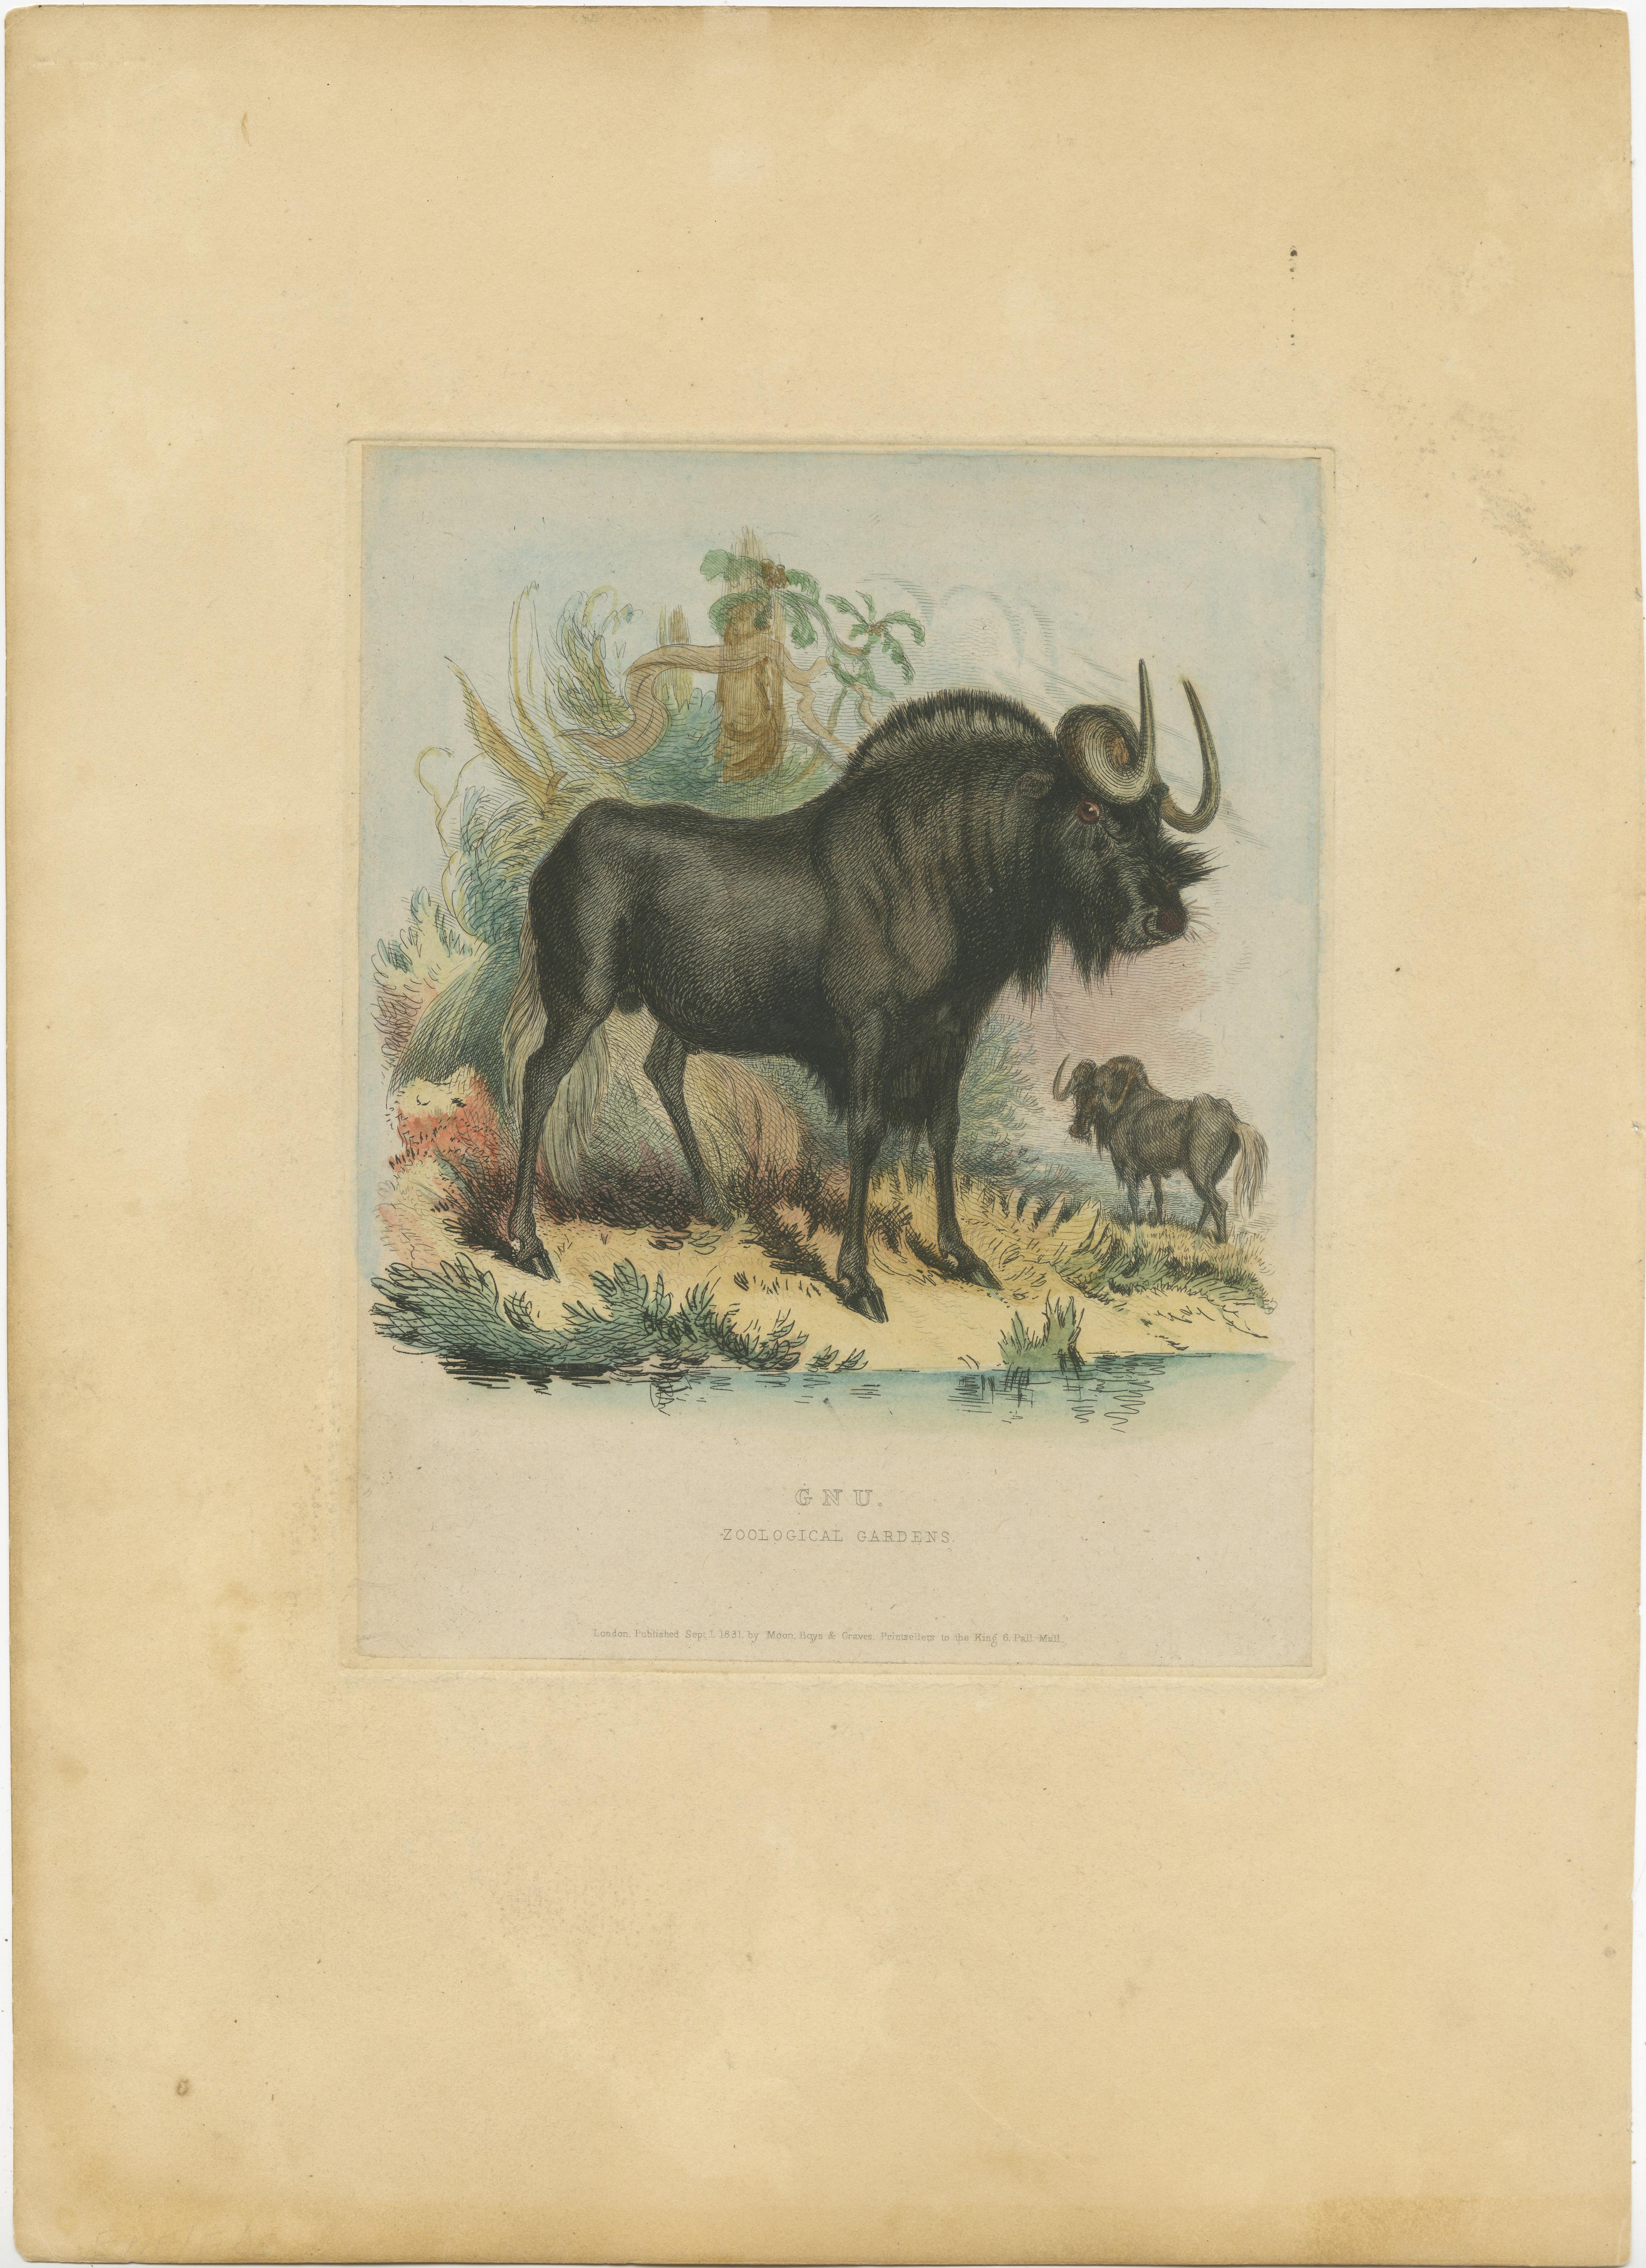 Antique print titled 'Gnu'. Original old print of a gnu or wildebeest. This print originates from the series 'Characteristic sketches of animals, principally from the Zoological Gardens, Regent's Park' published circa 1832 by John Henry Barrow and